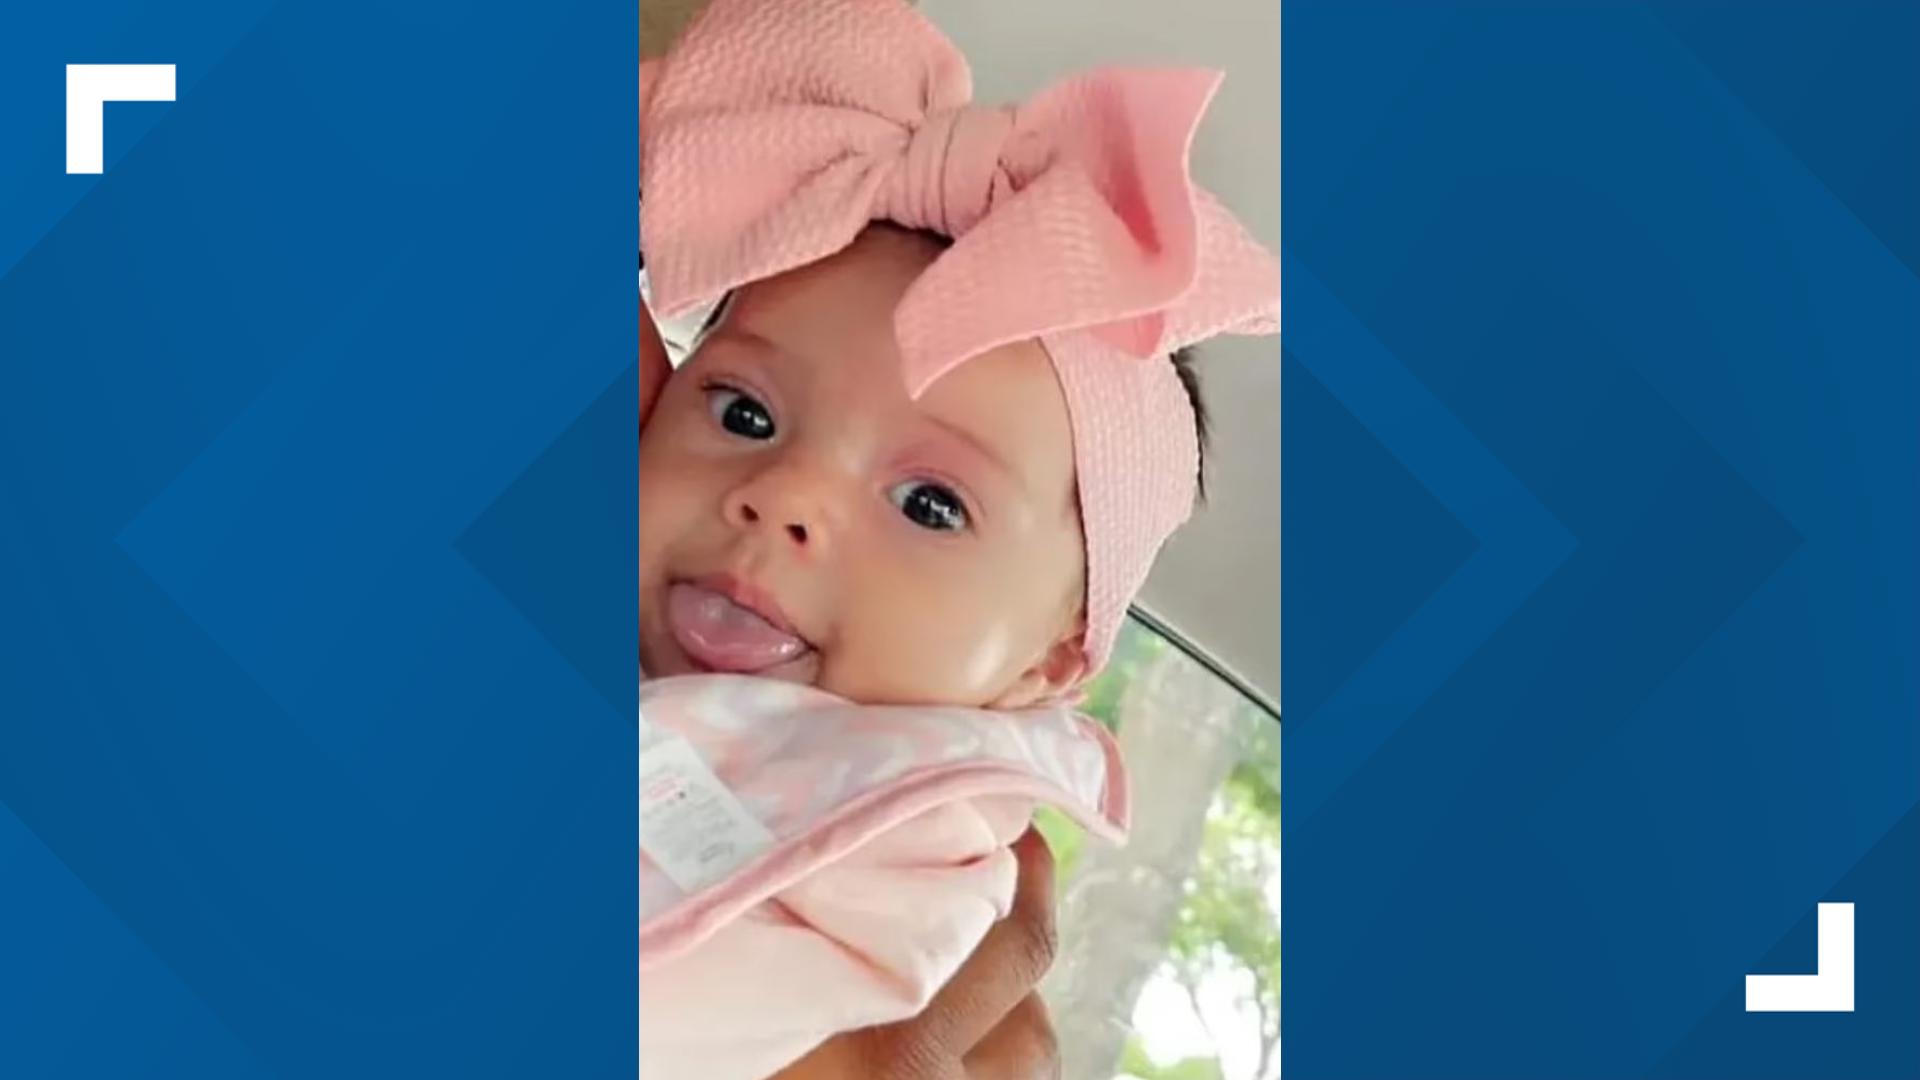 Alek Isaiah Collins, of Manvel, Texas, was arrested in Abilene Monday and the abducted 10-month-old baby girl was found safe, police said.